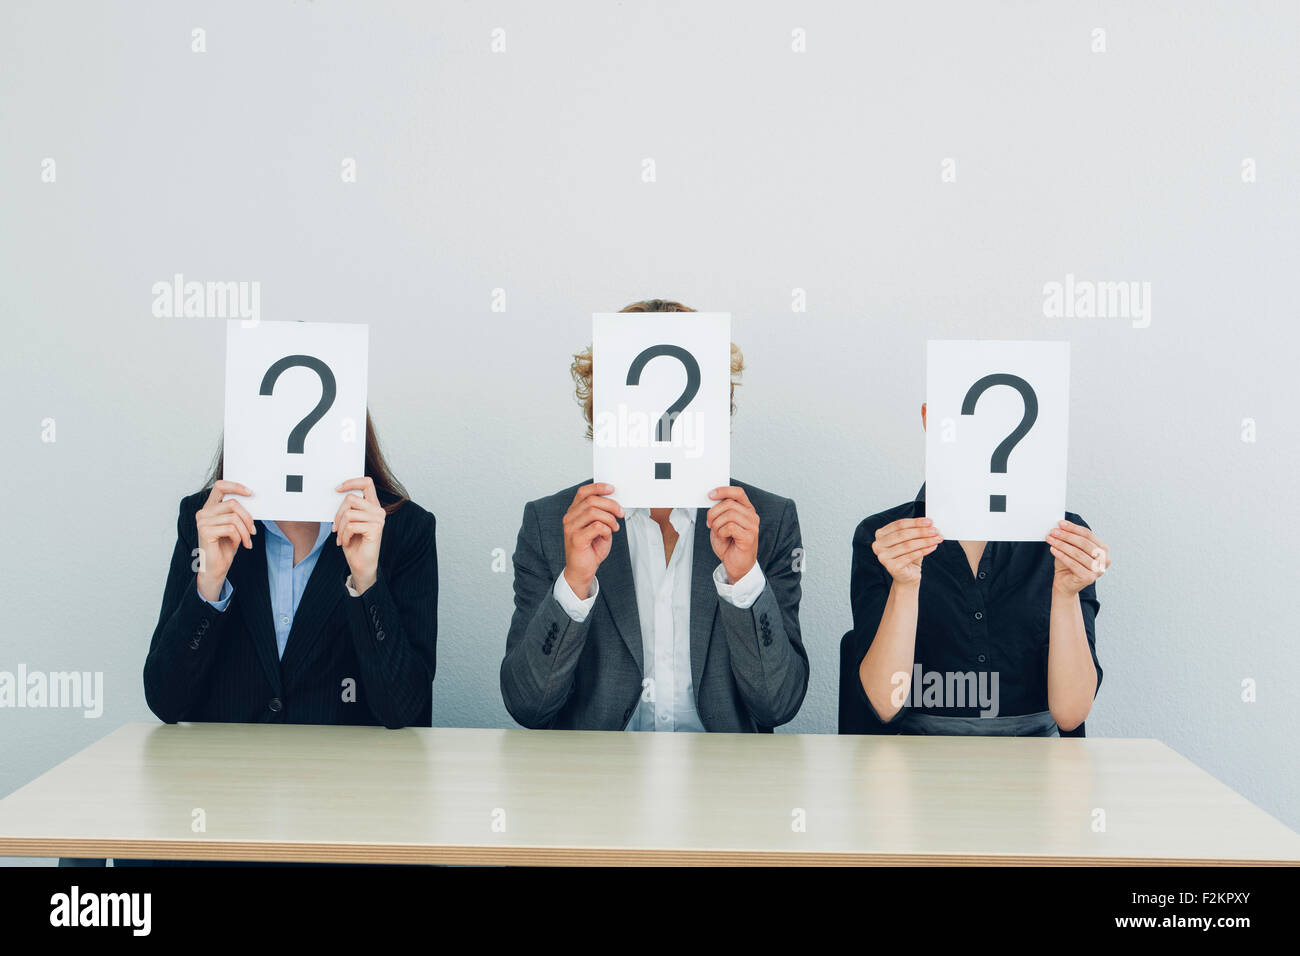 Business people with question mark on placards Stock Photo